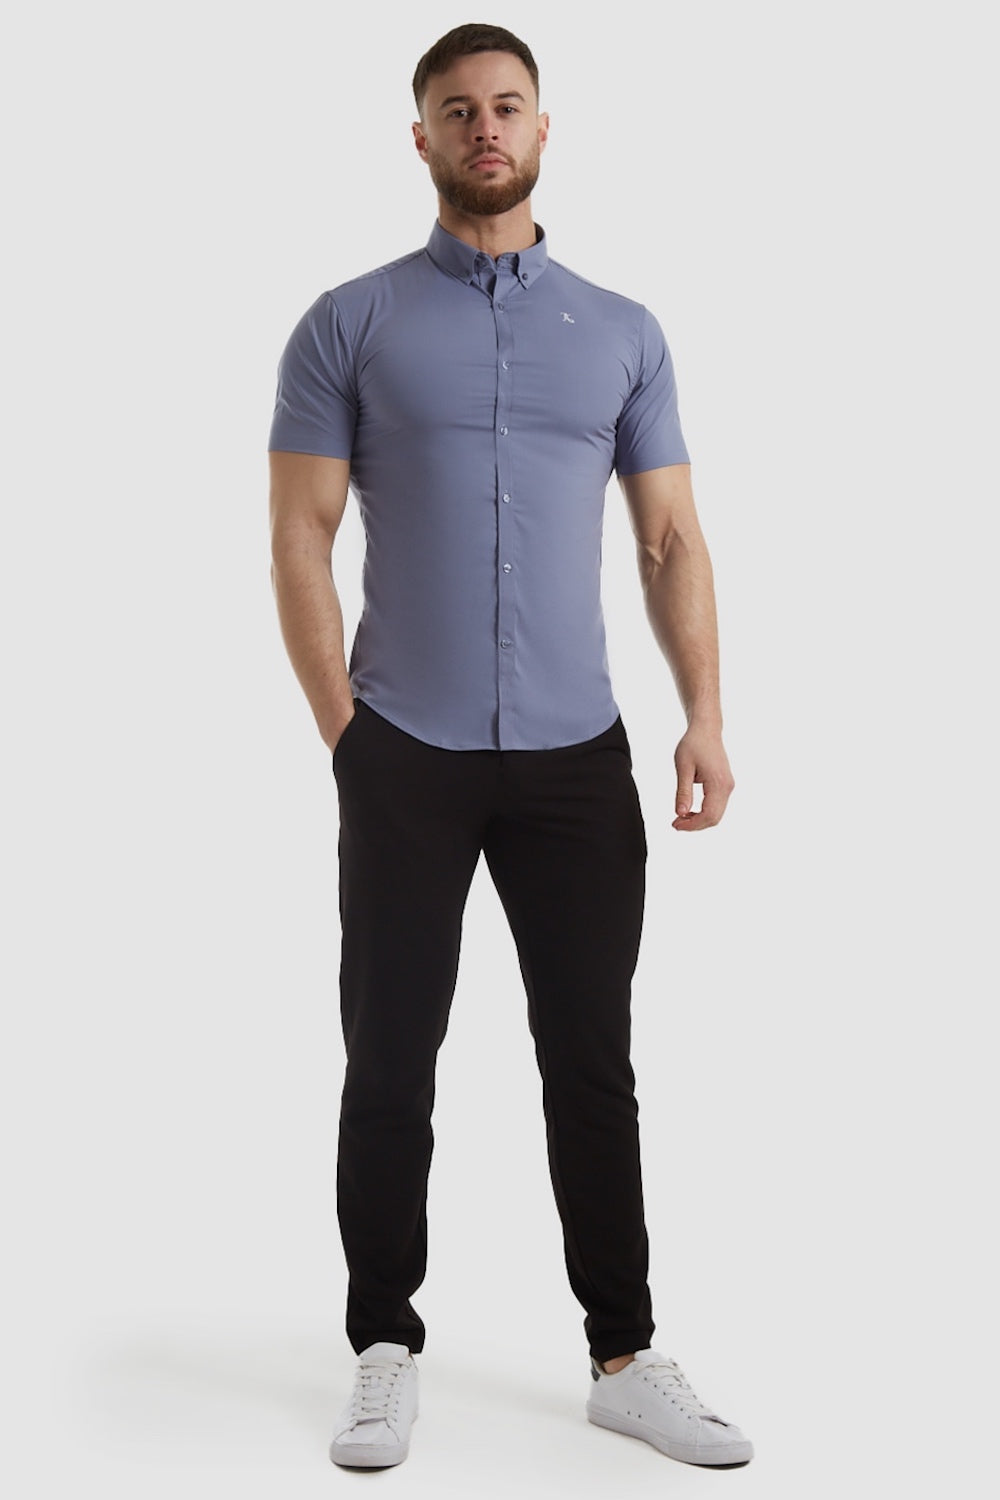 Fashion Fit T-Shirt in Grey Marl - TAILORED ATHLETE - USA